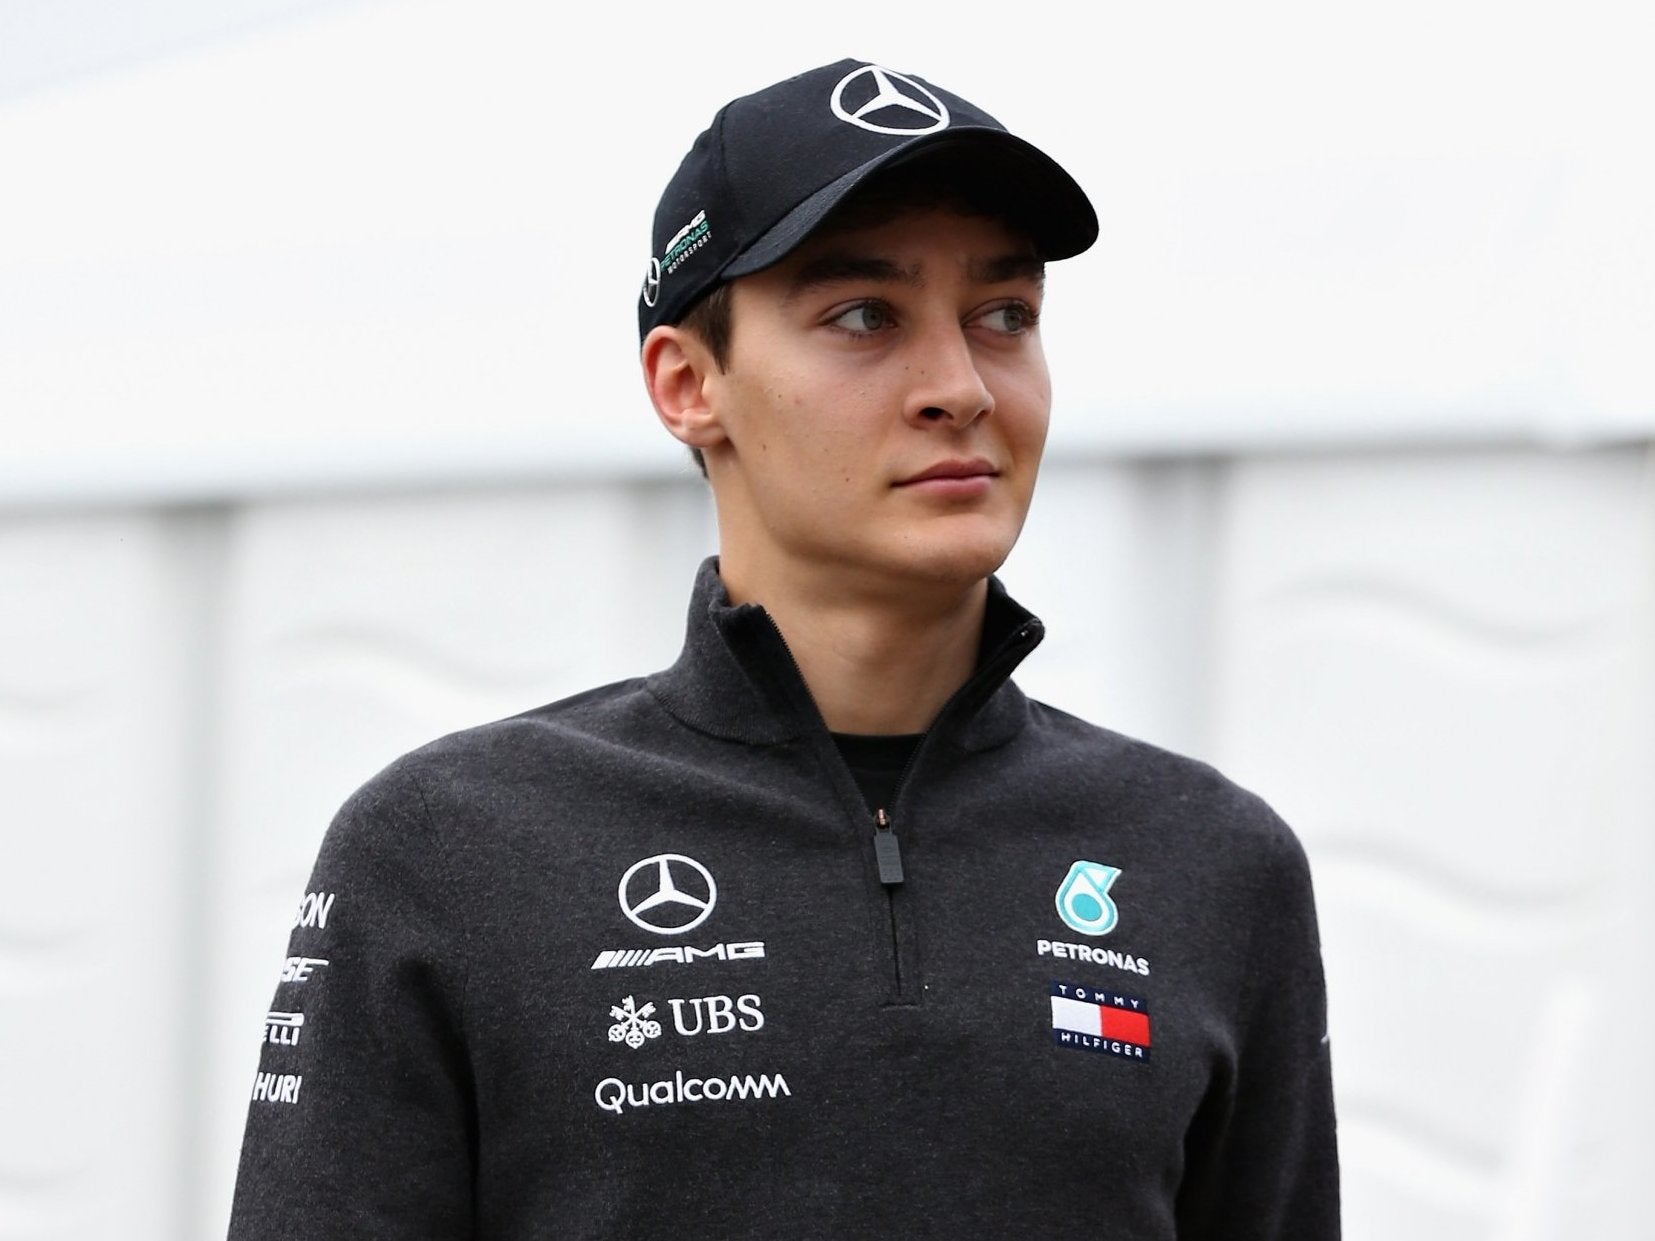 Russell is the current Mercedes reserve driver